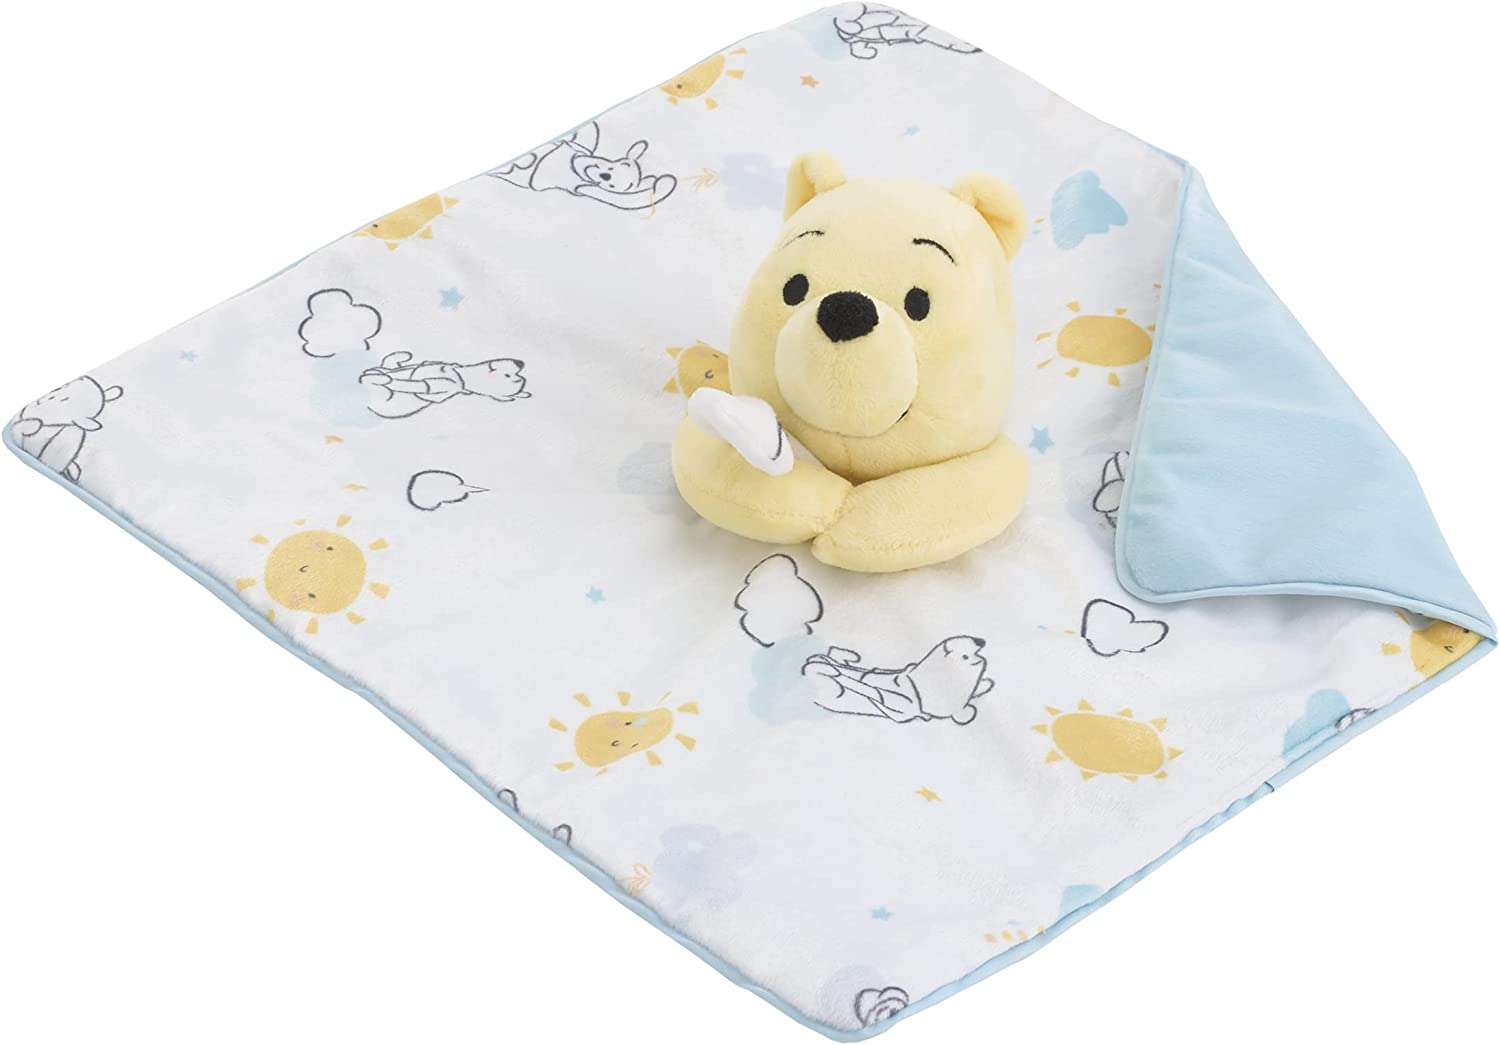 Disney Winnie The Pooh White, Yellow, and Aqua Cloud and Sun Lovey Security Blanket - image 3 of 5